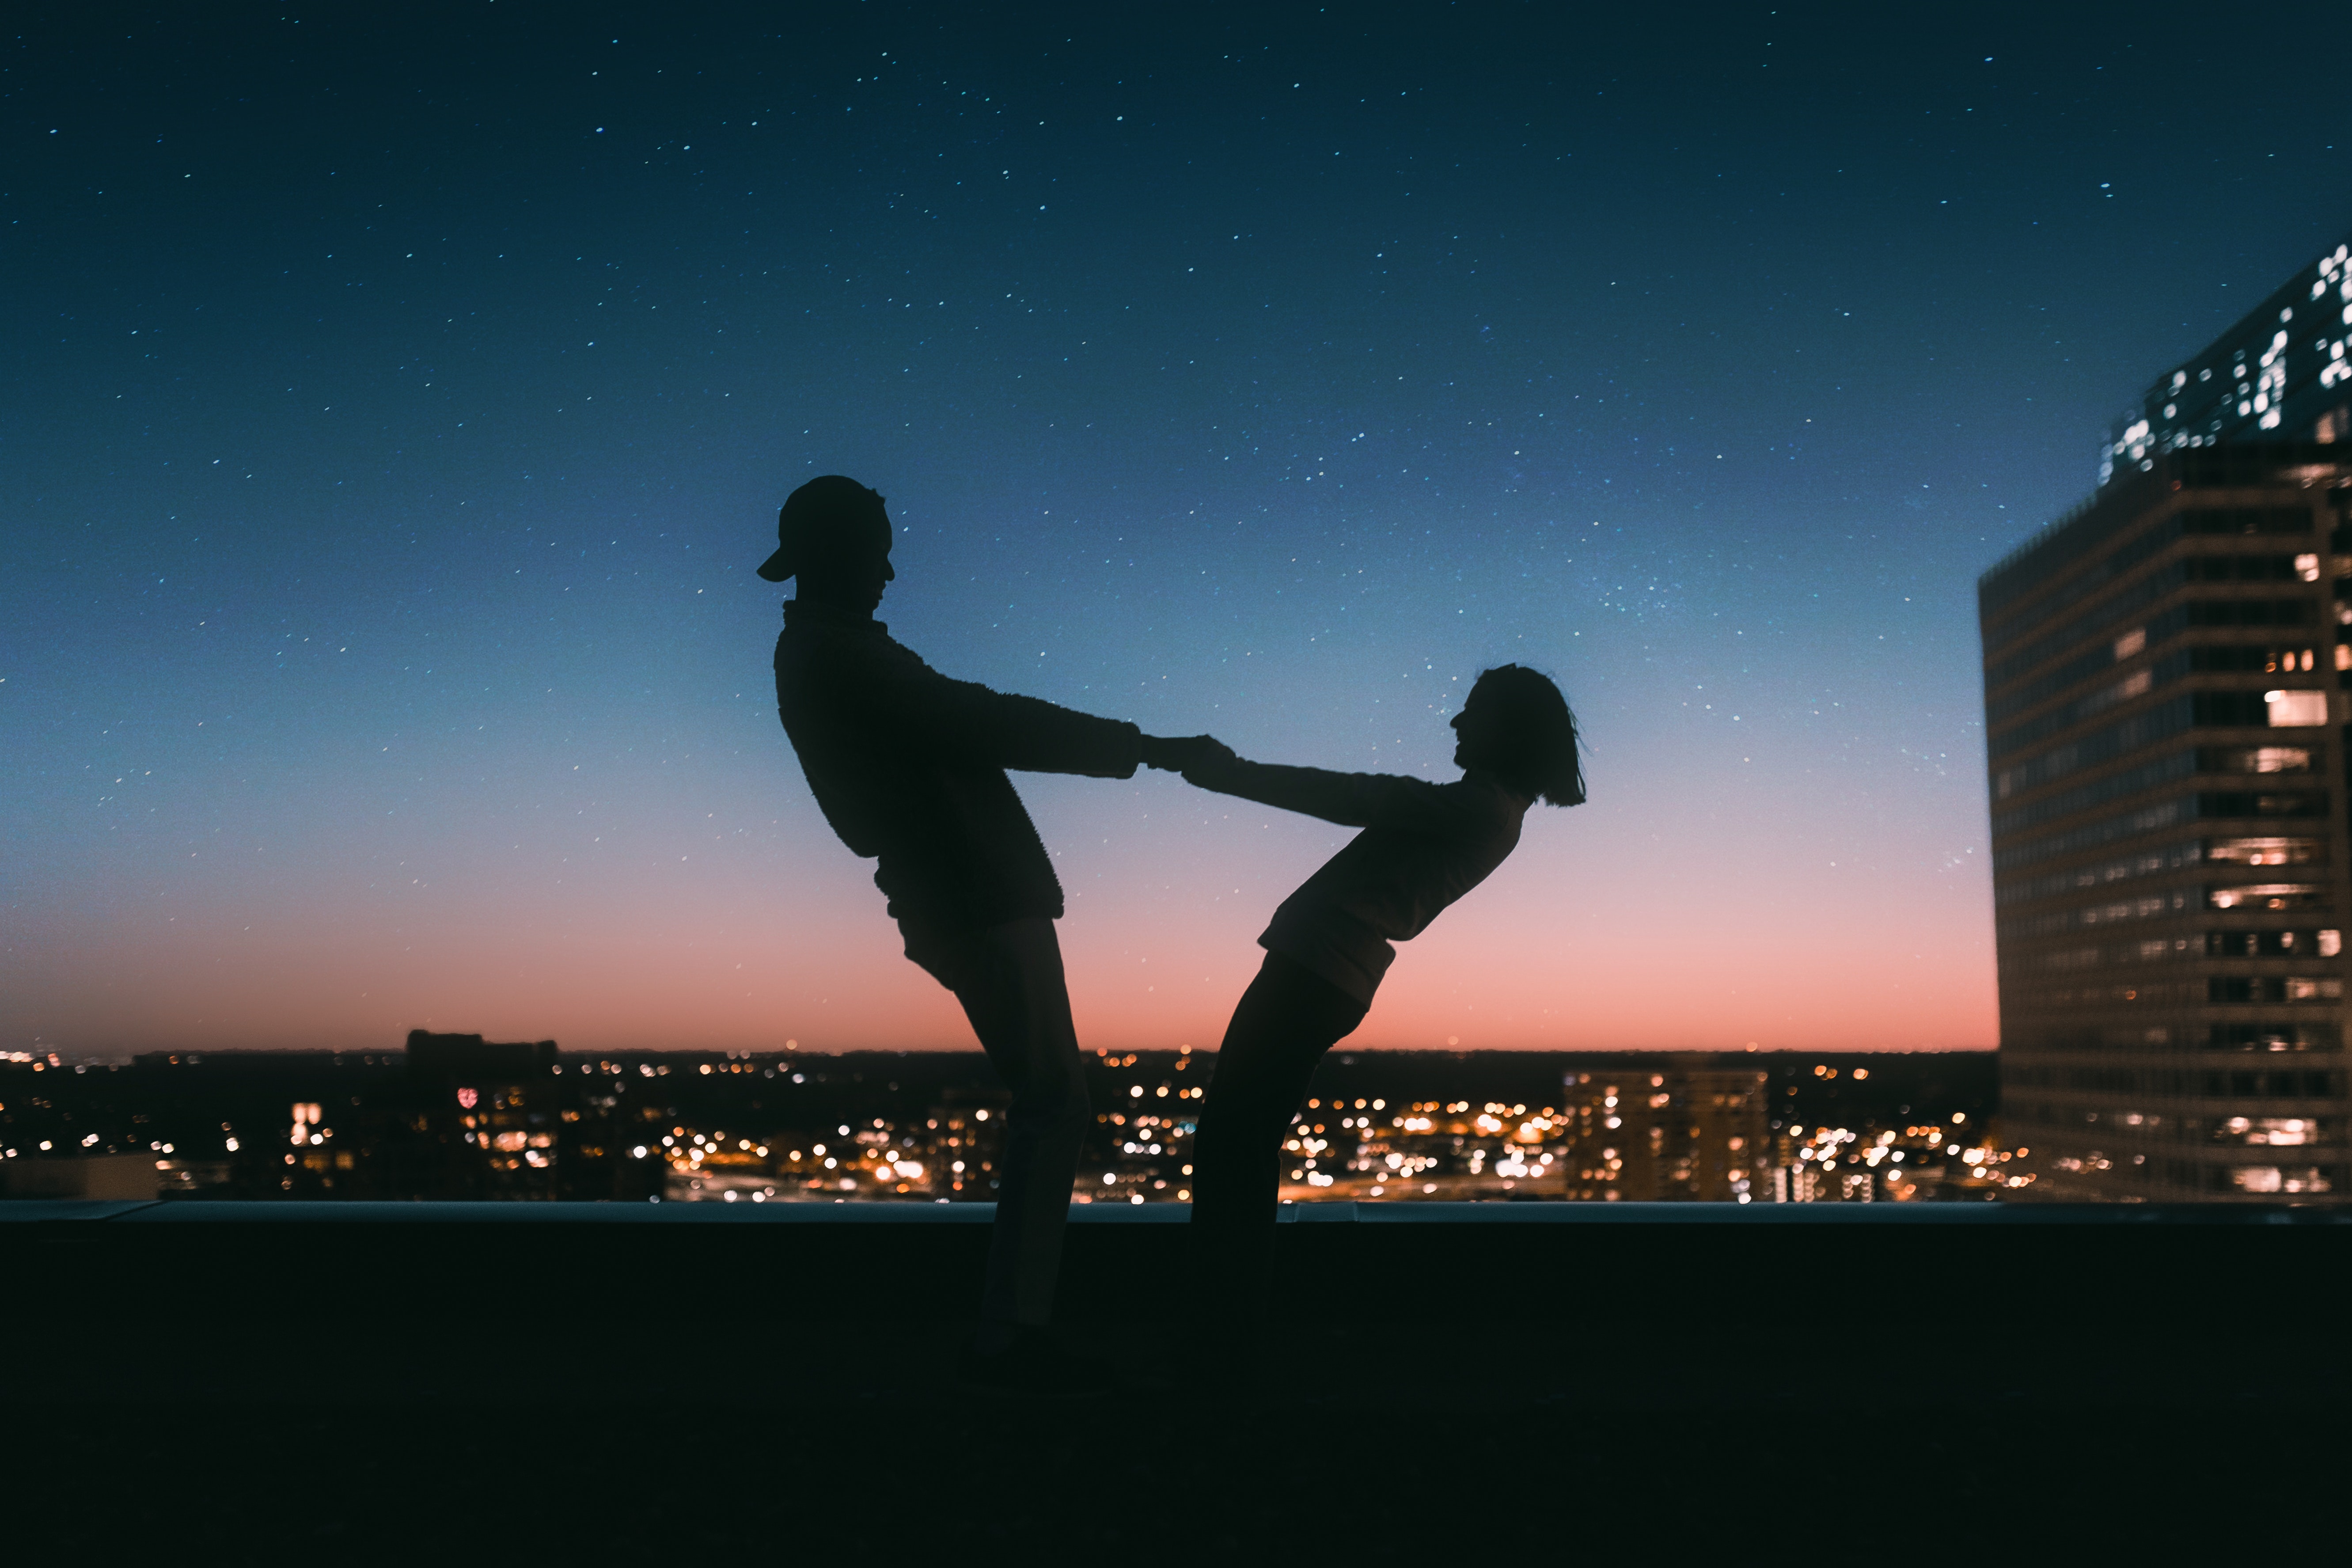 A silhouette of two individuals having fun on a roof in a city. | Source: Pexels